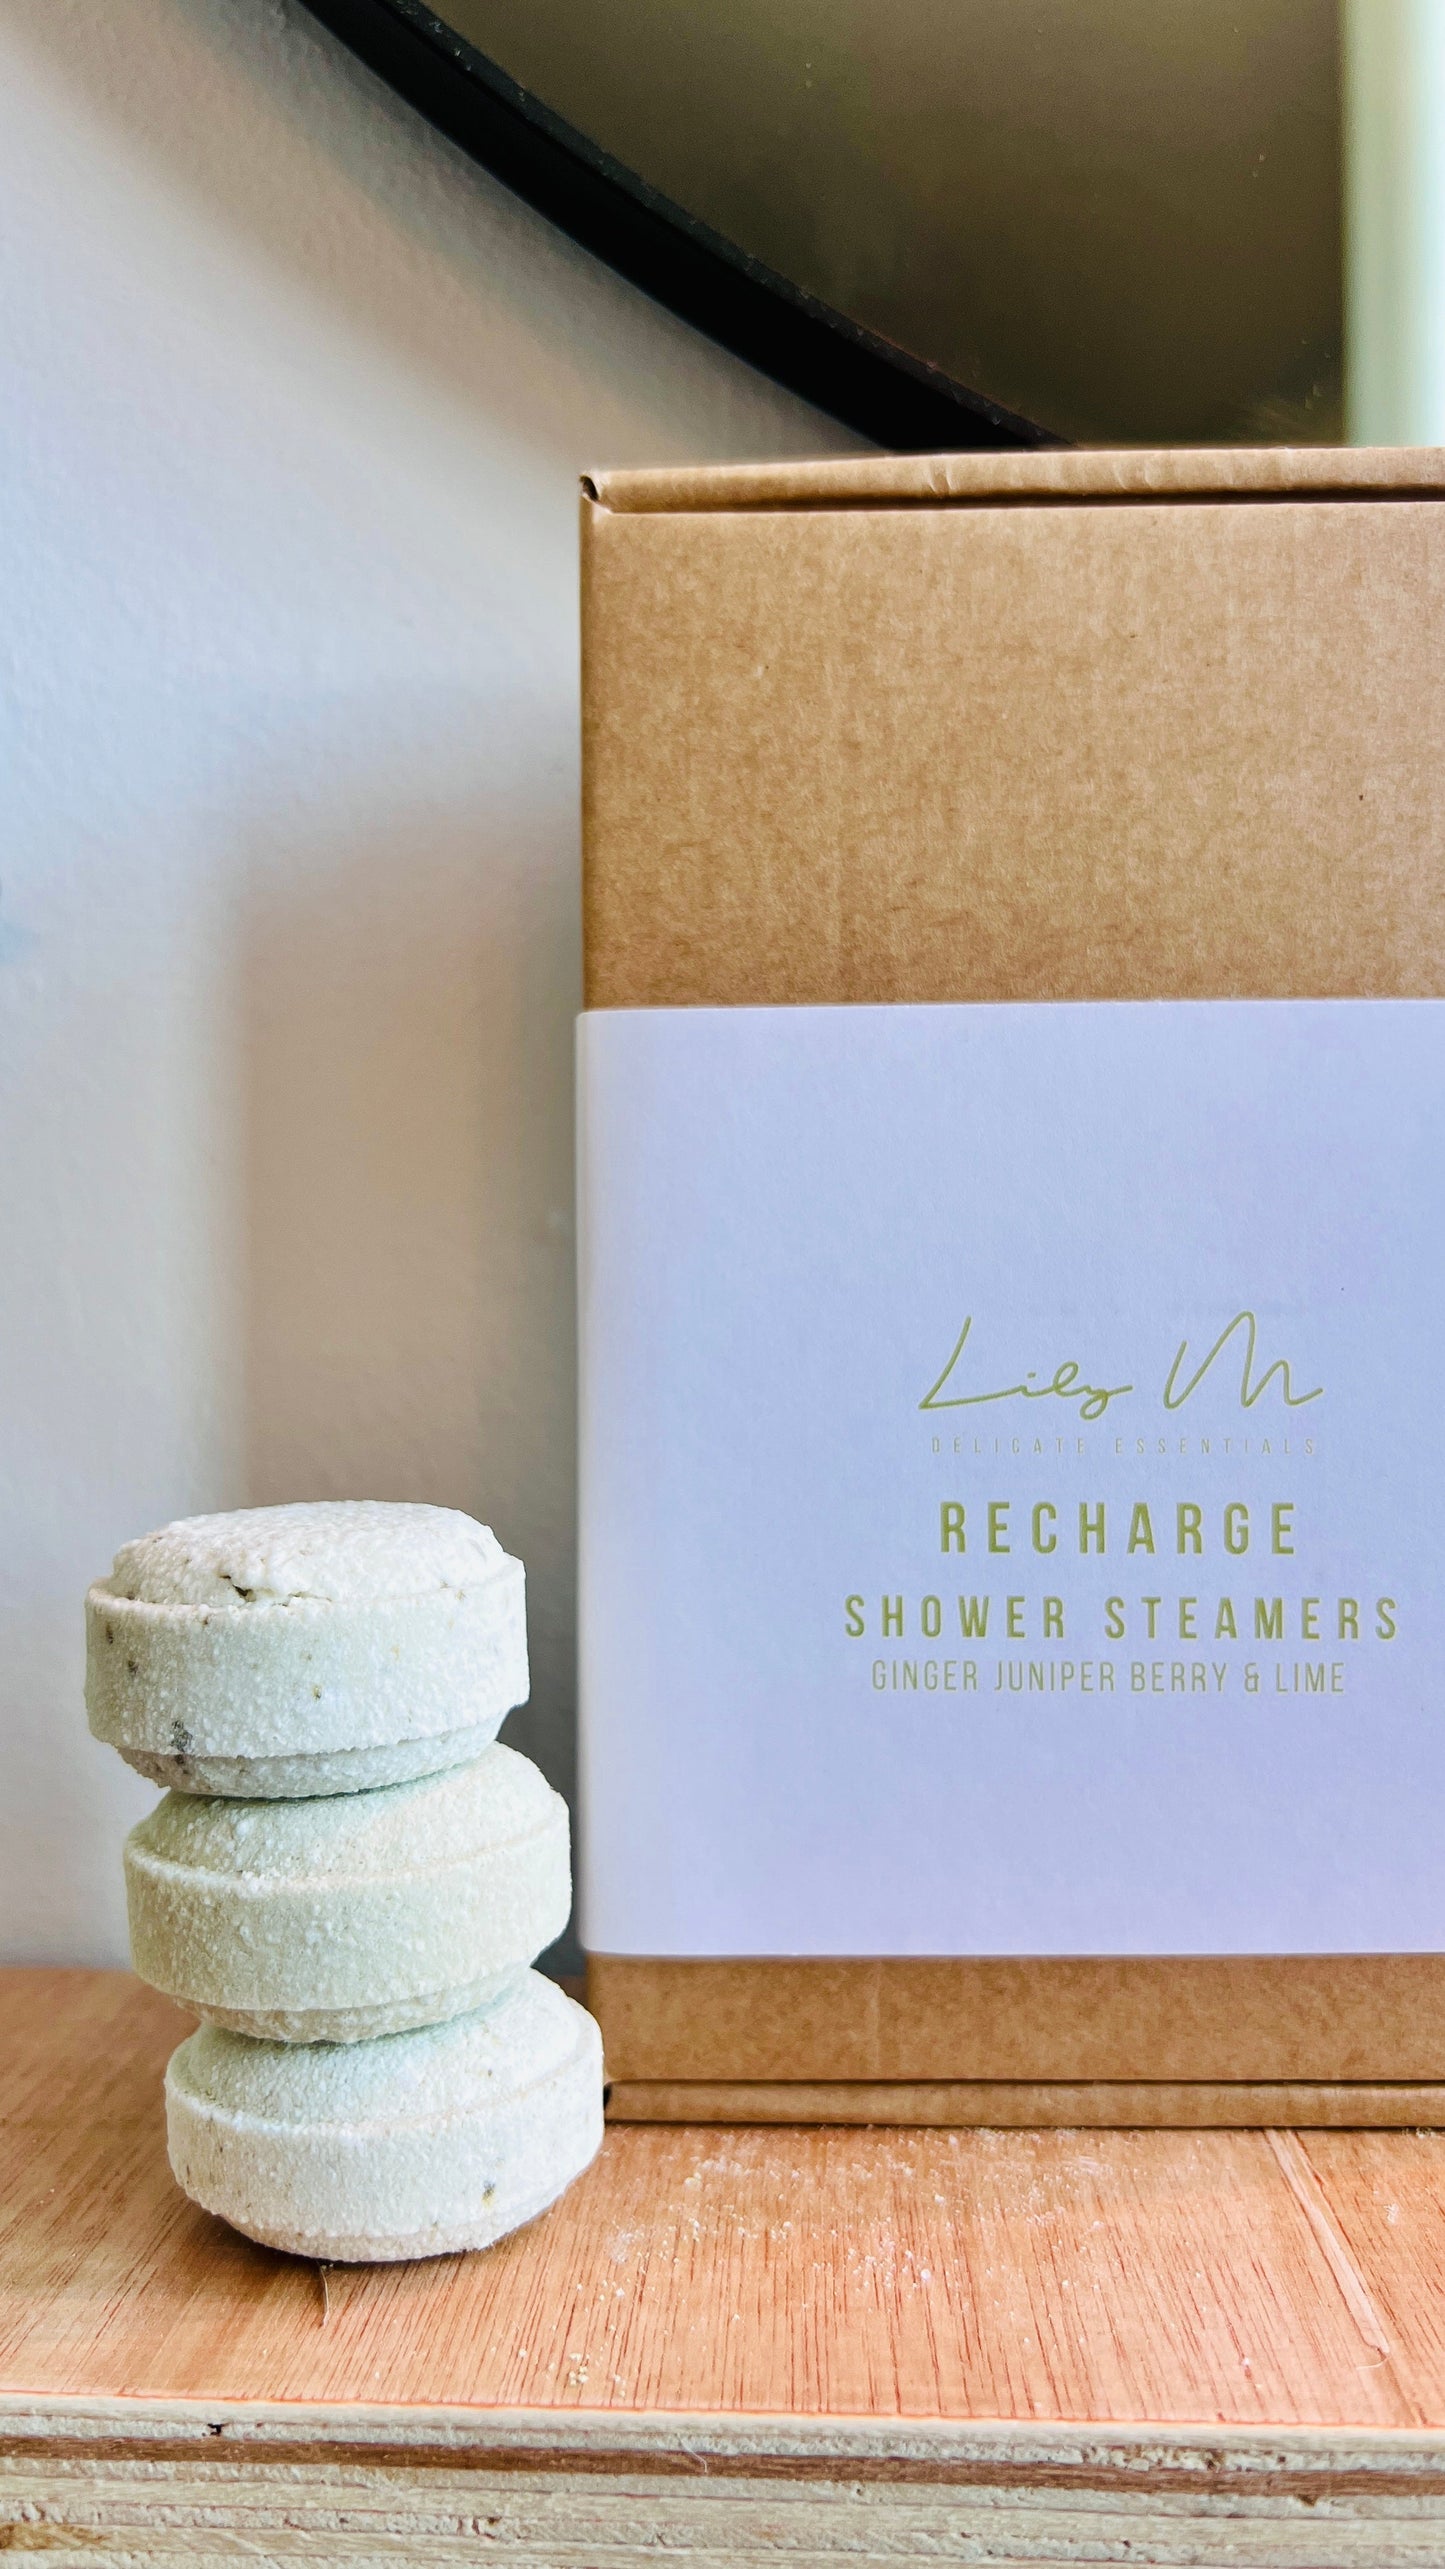 Recharge Shower Steamers